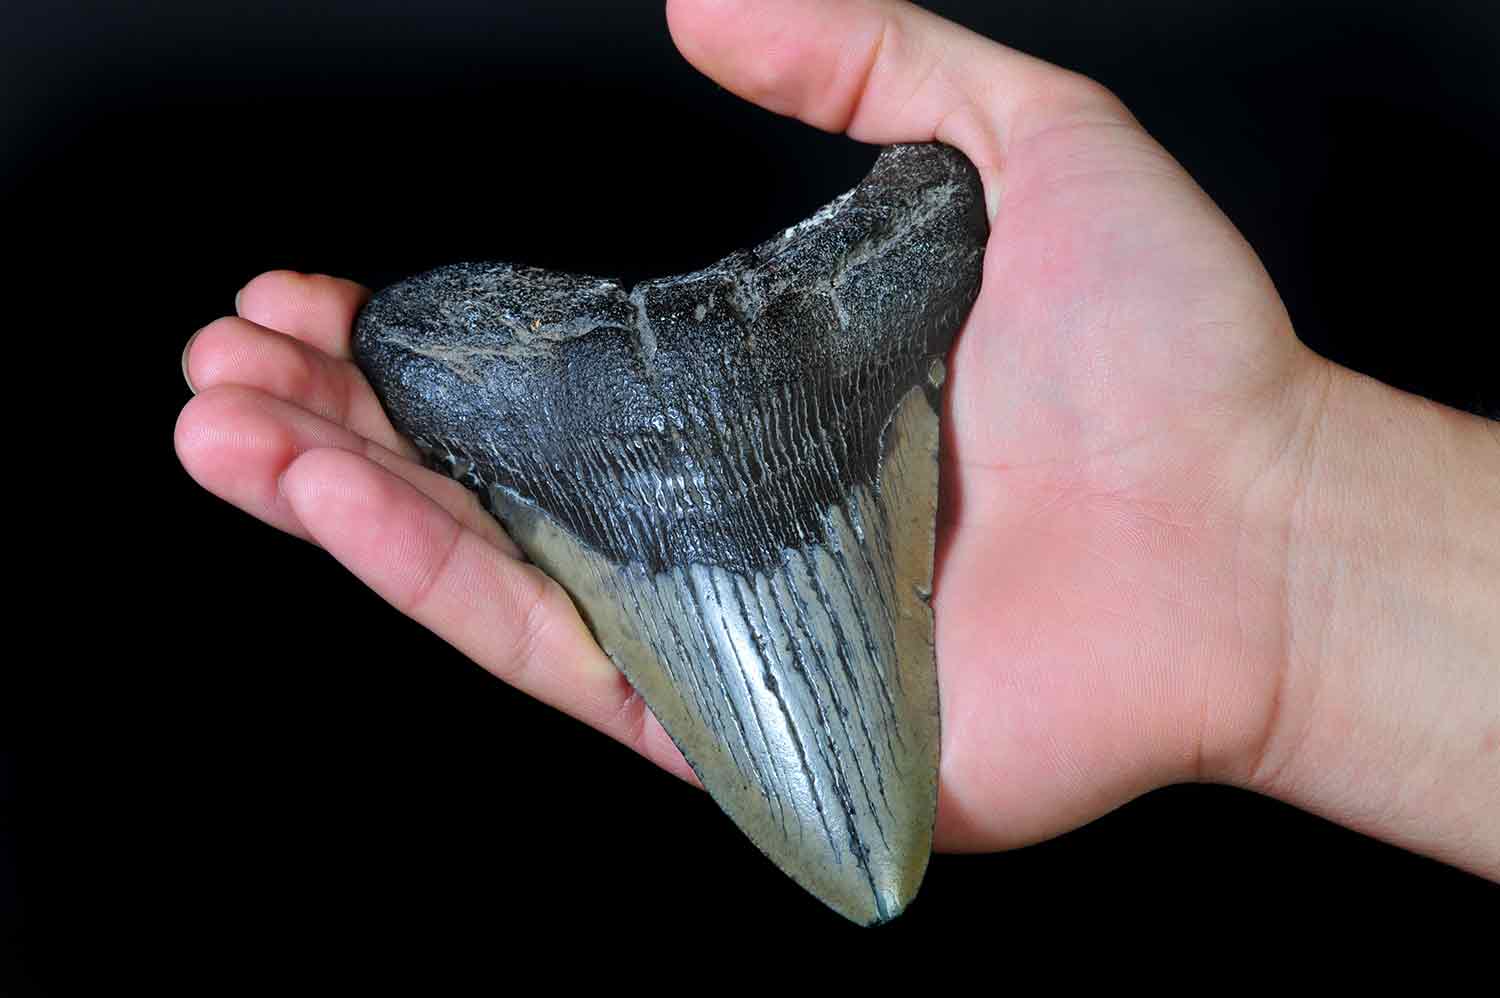 A fossilized tooth in a human hand. The tooth is as large as the hand.